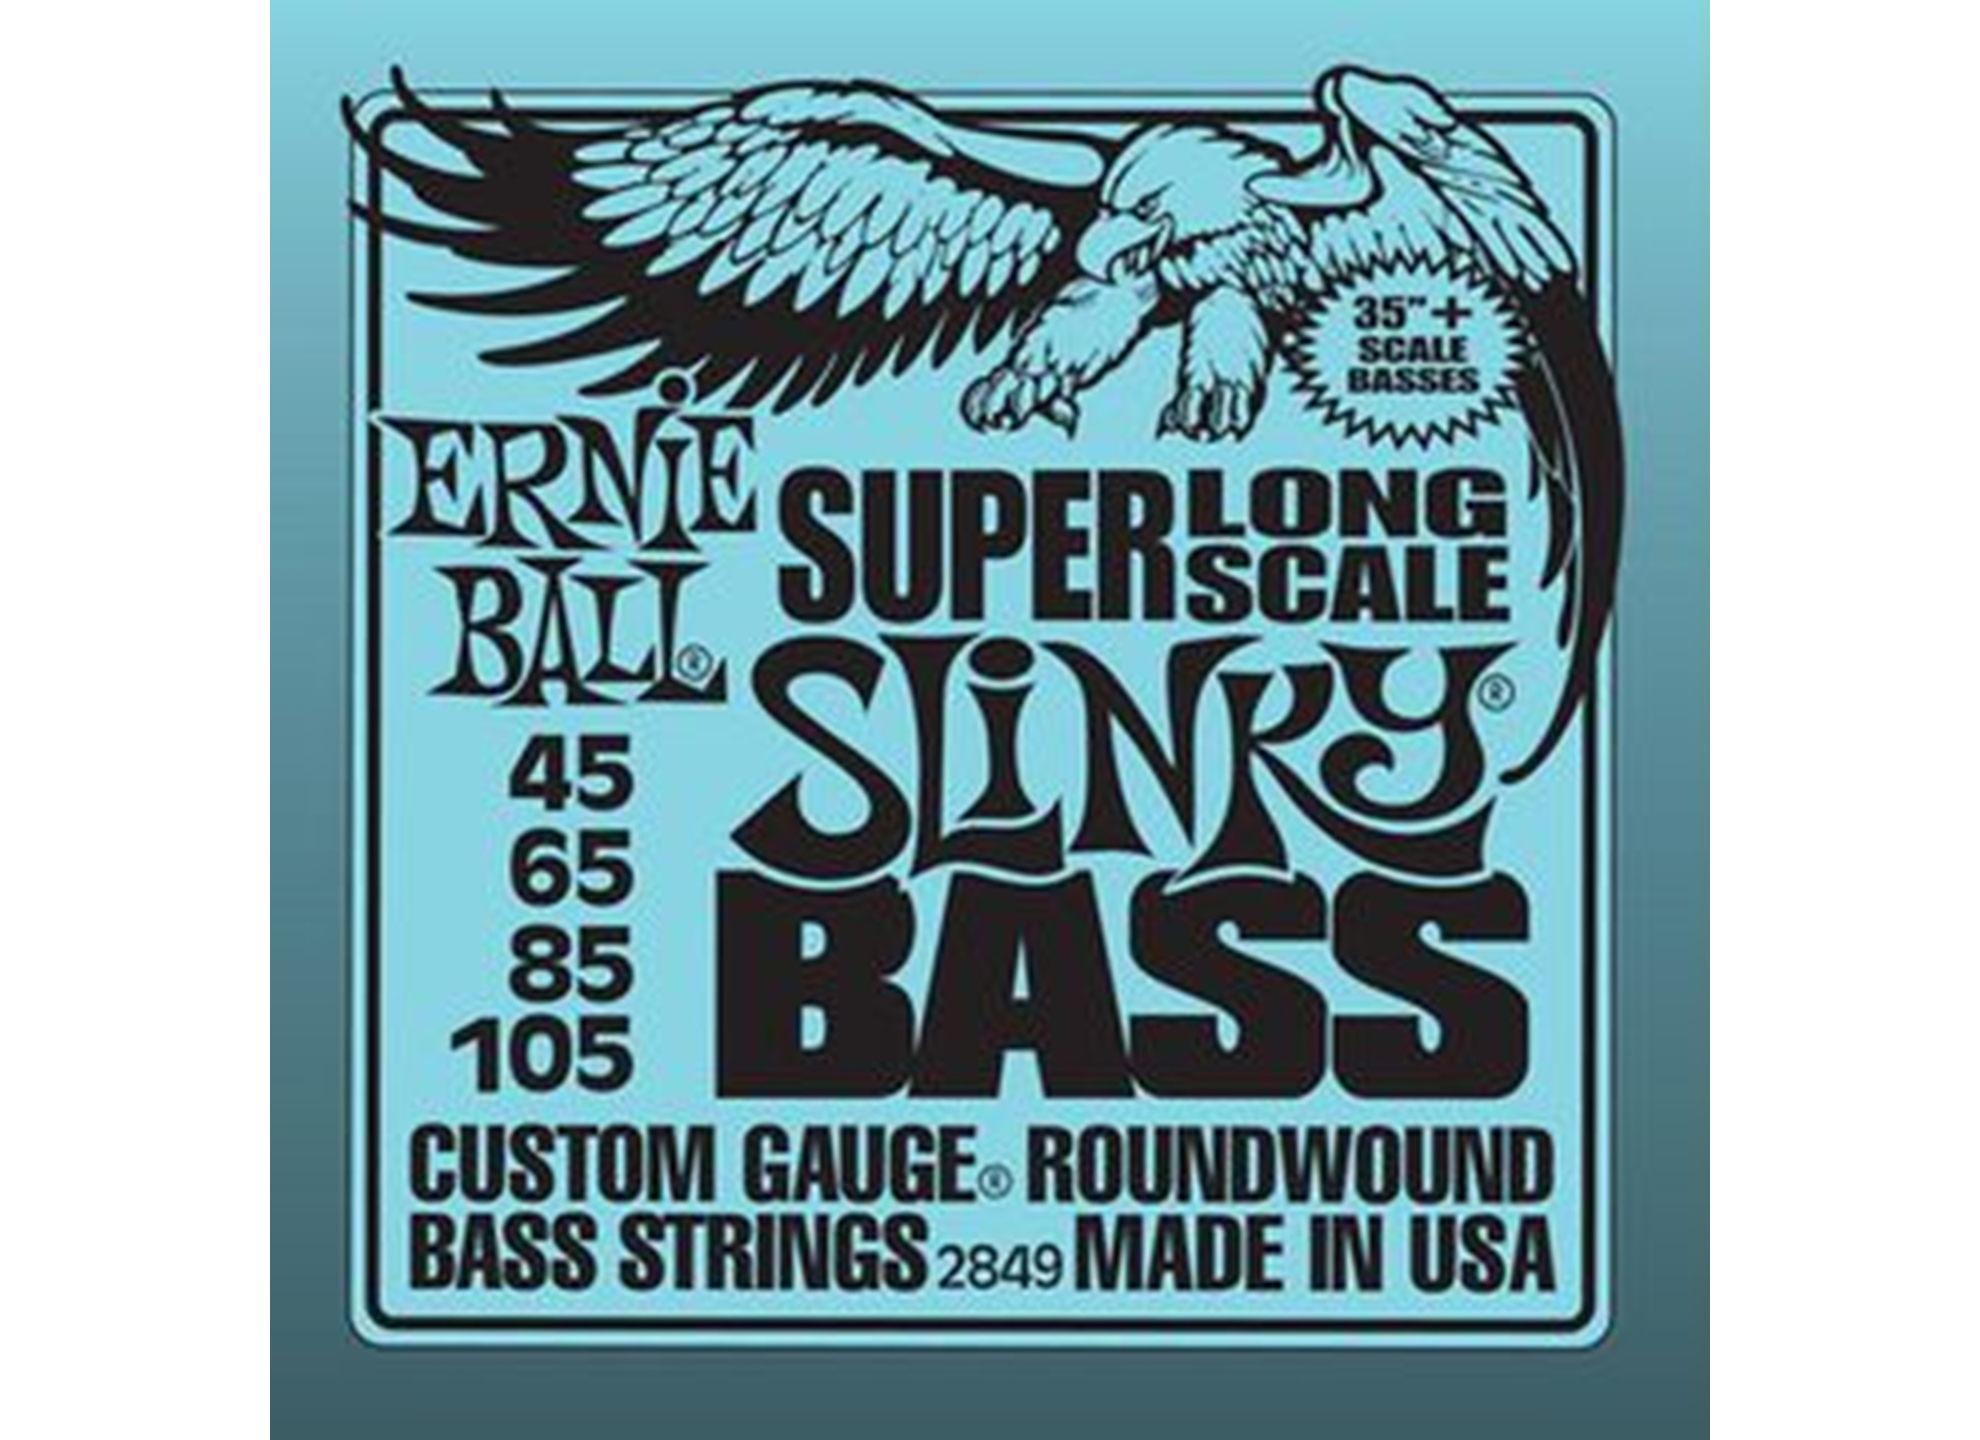 045-105 Slinky Bass Super Long Scale Nickel Wound 2849